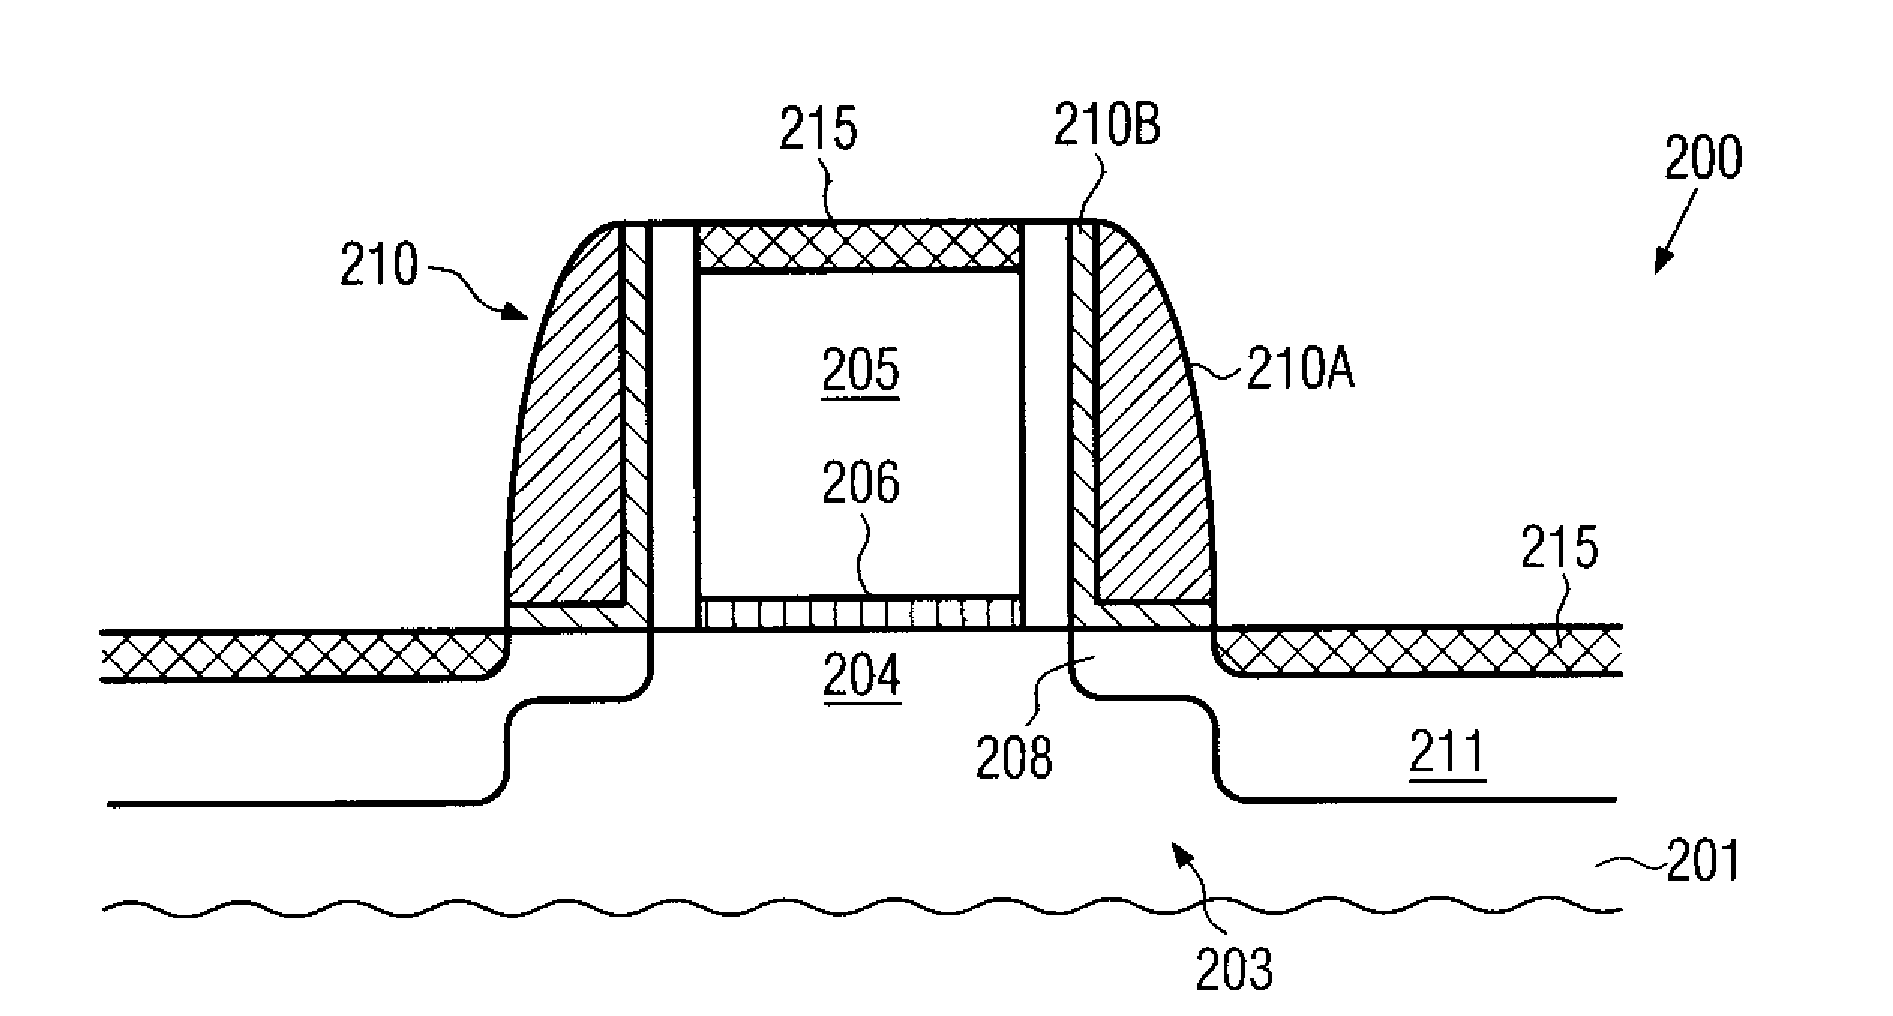 Drain/source extension structure of a field effect transistor with reduced boron diffusion